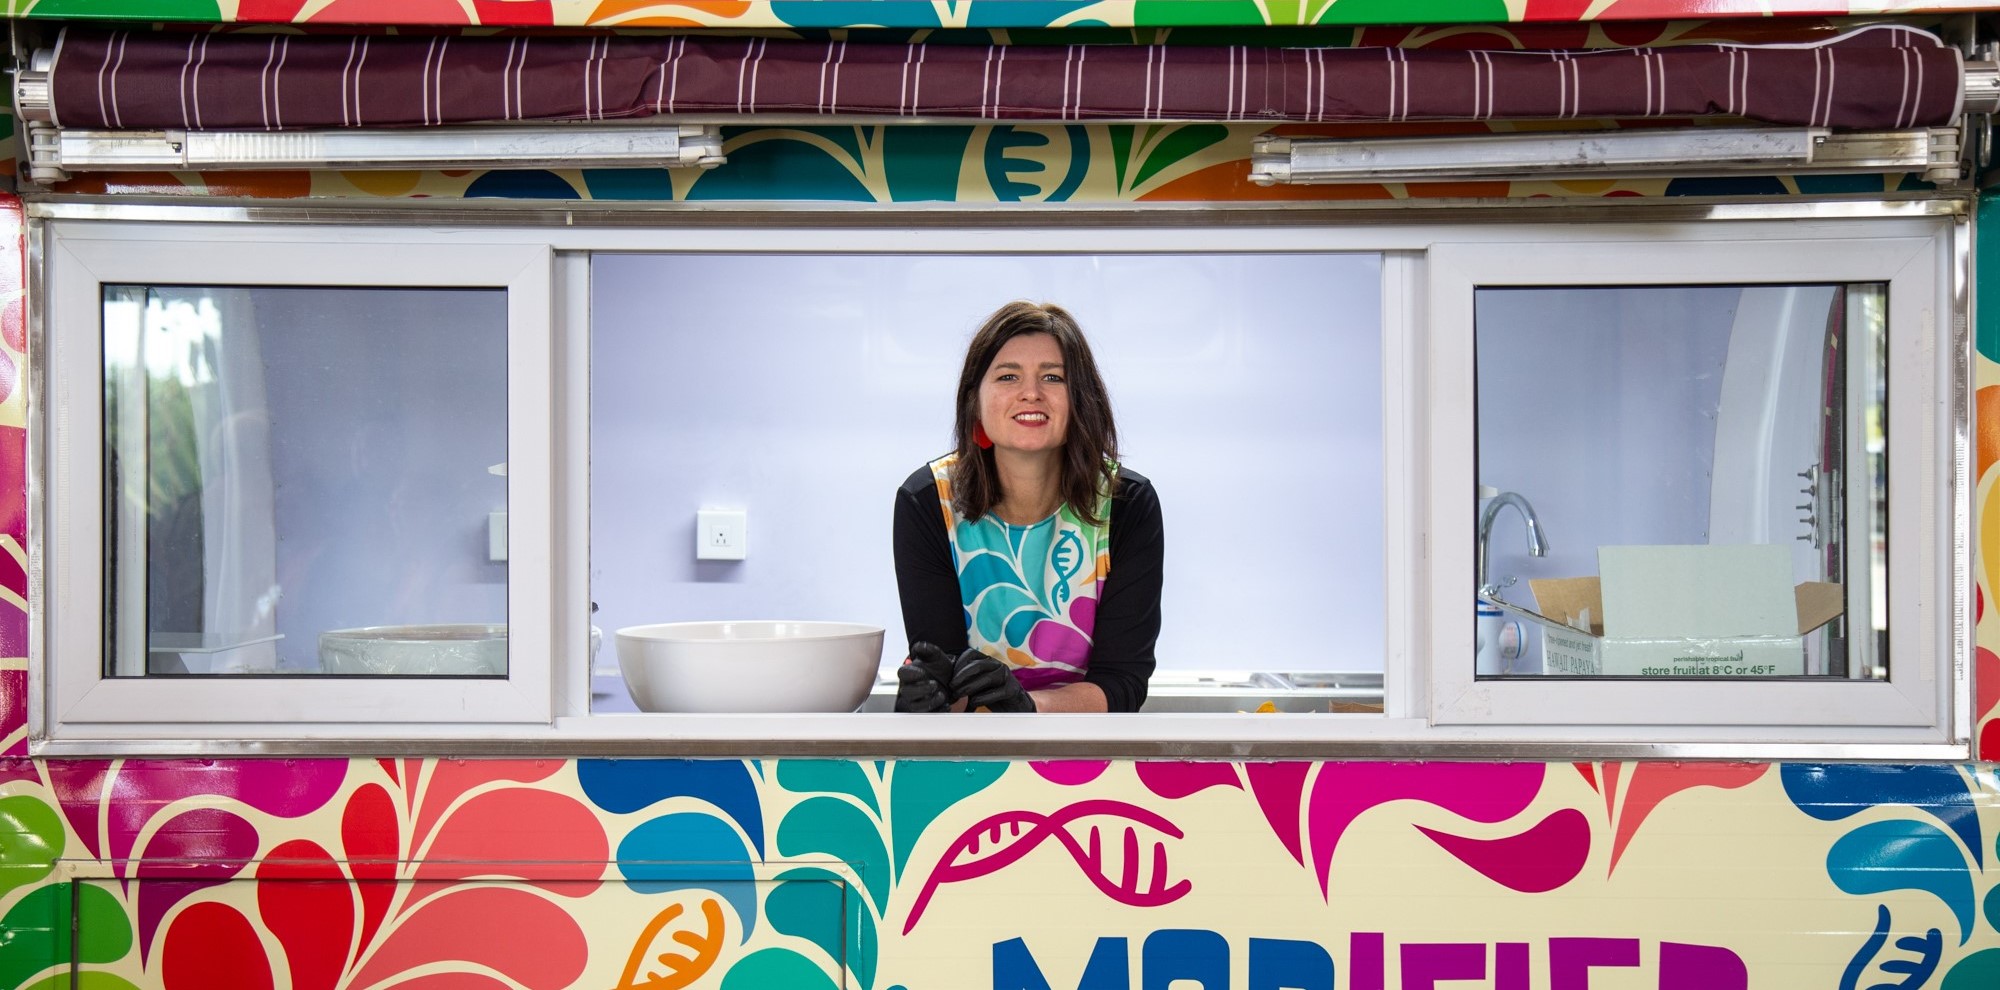 Sarah Evanega smiles out of the window of a food truck. Her dress is brightly colored and matches the side of the truck, which says "Modified."